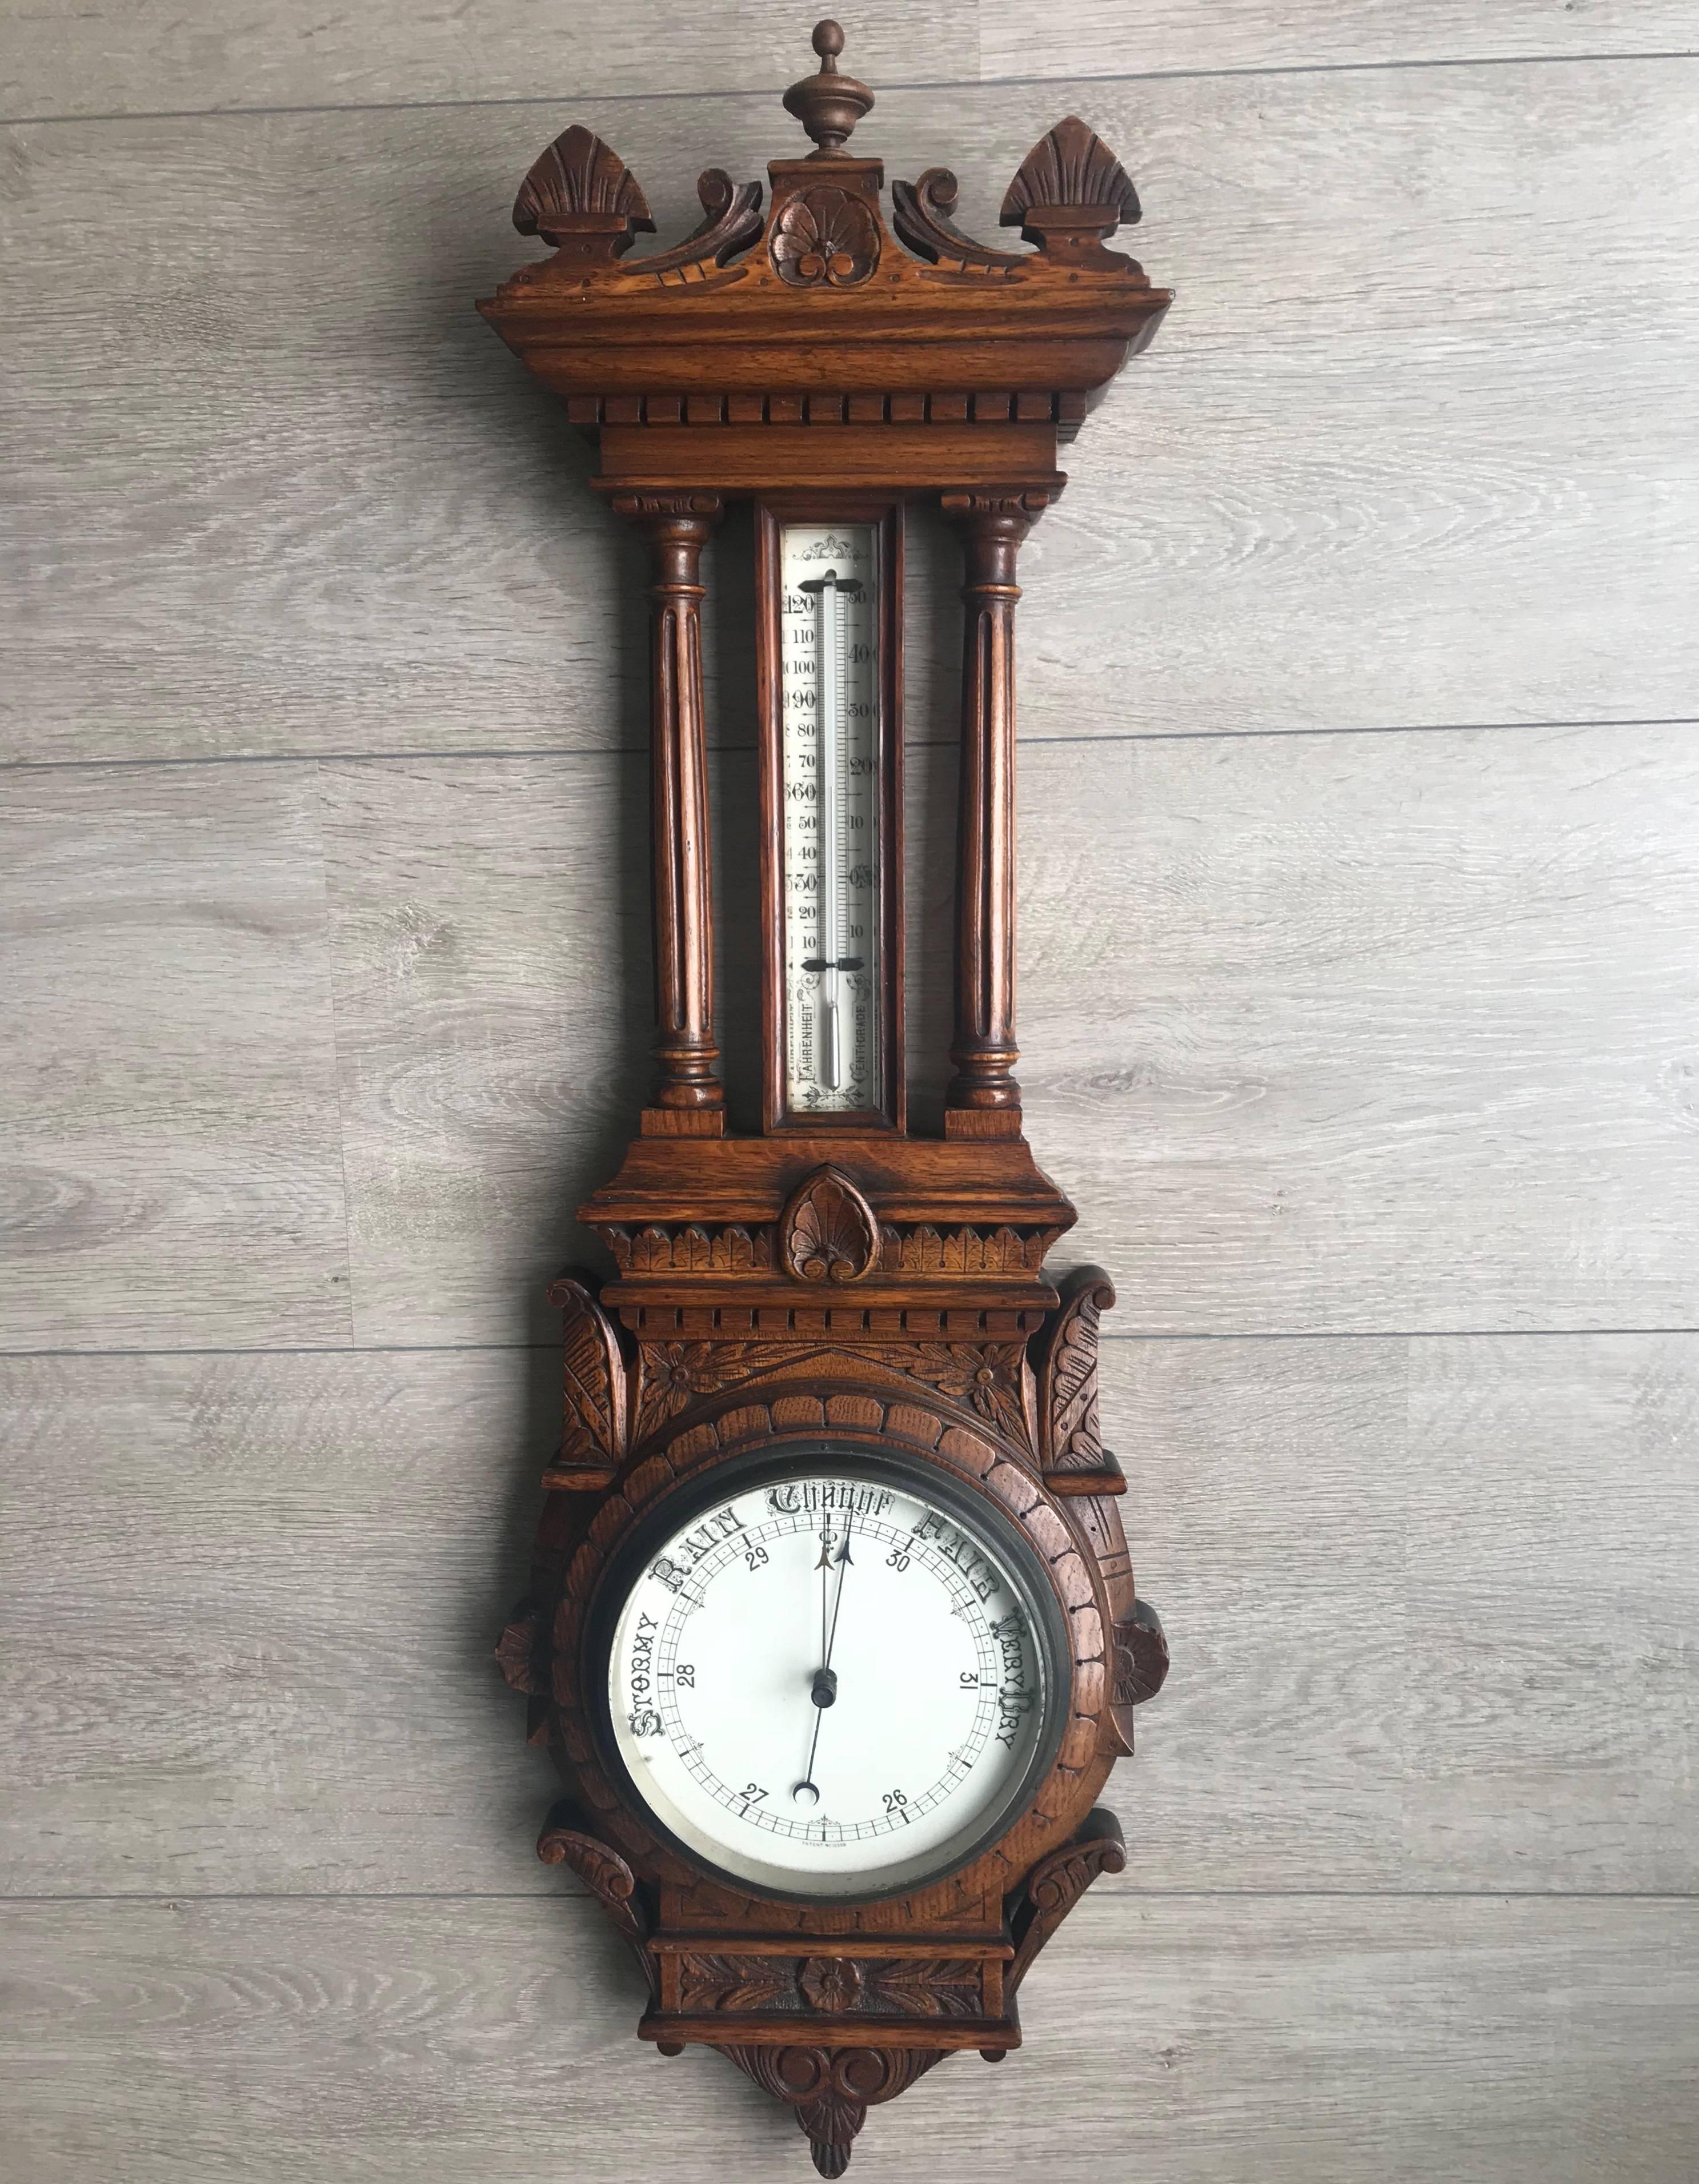 Hand-Carved Large and Mint Condition Antique English Carved Oak and Porcelain Wall Barometer